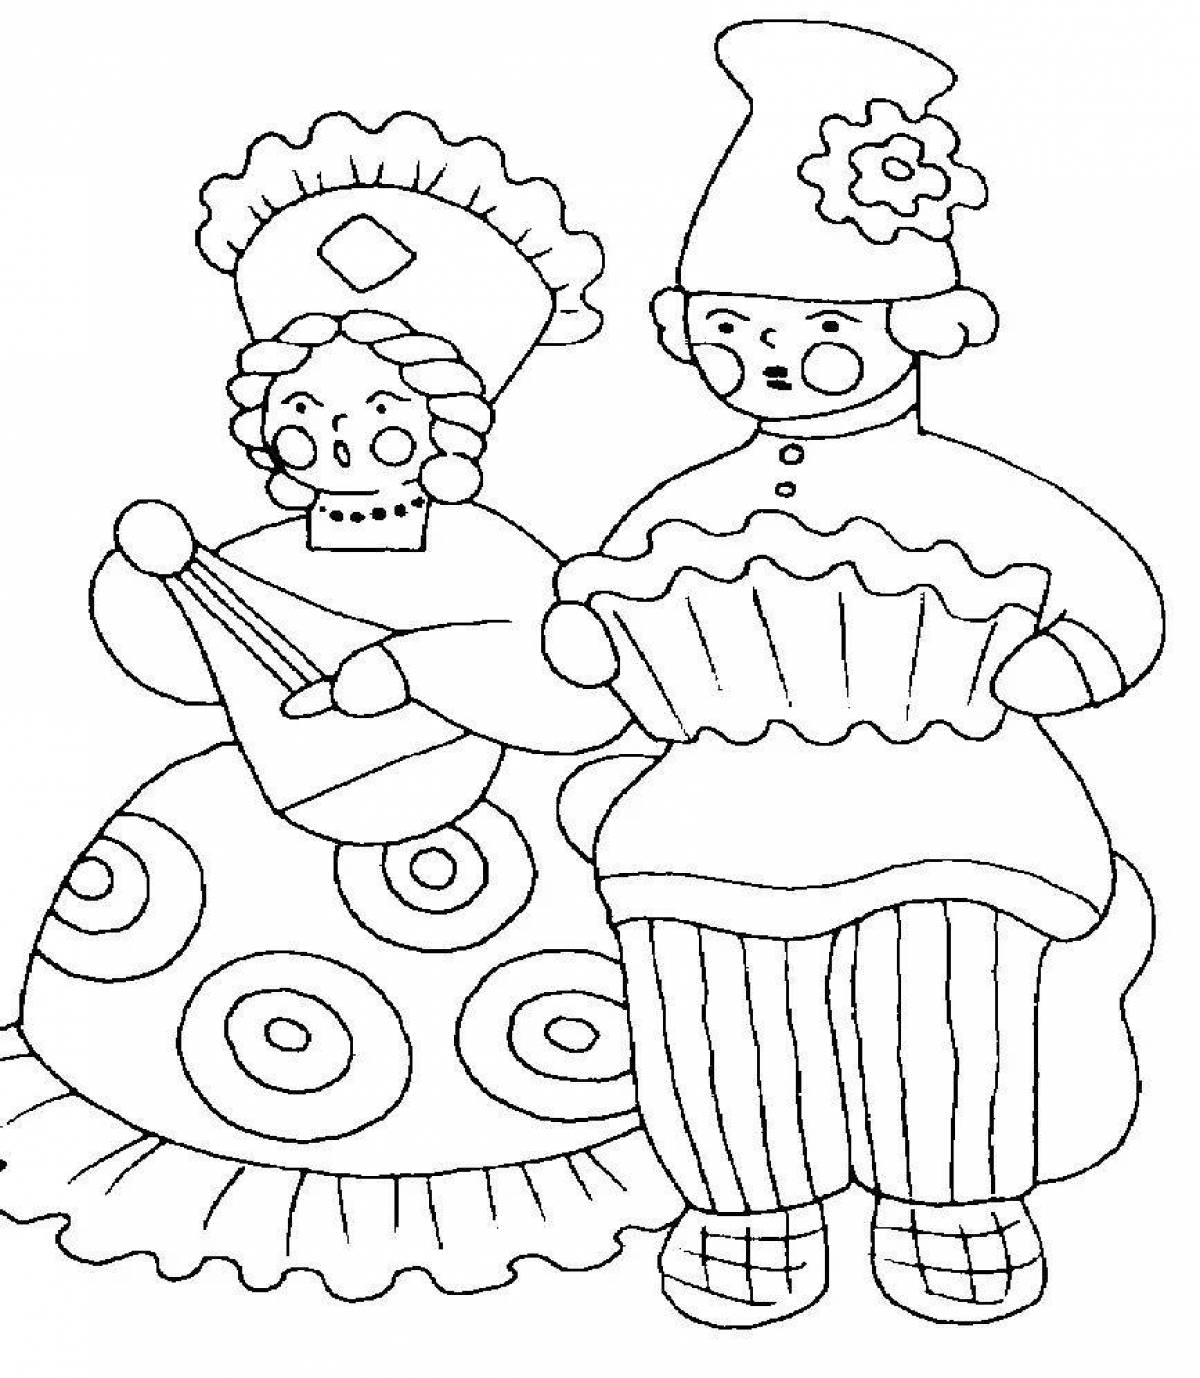 Exotic Russian folk coloring for children